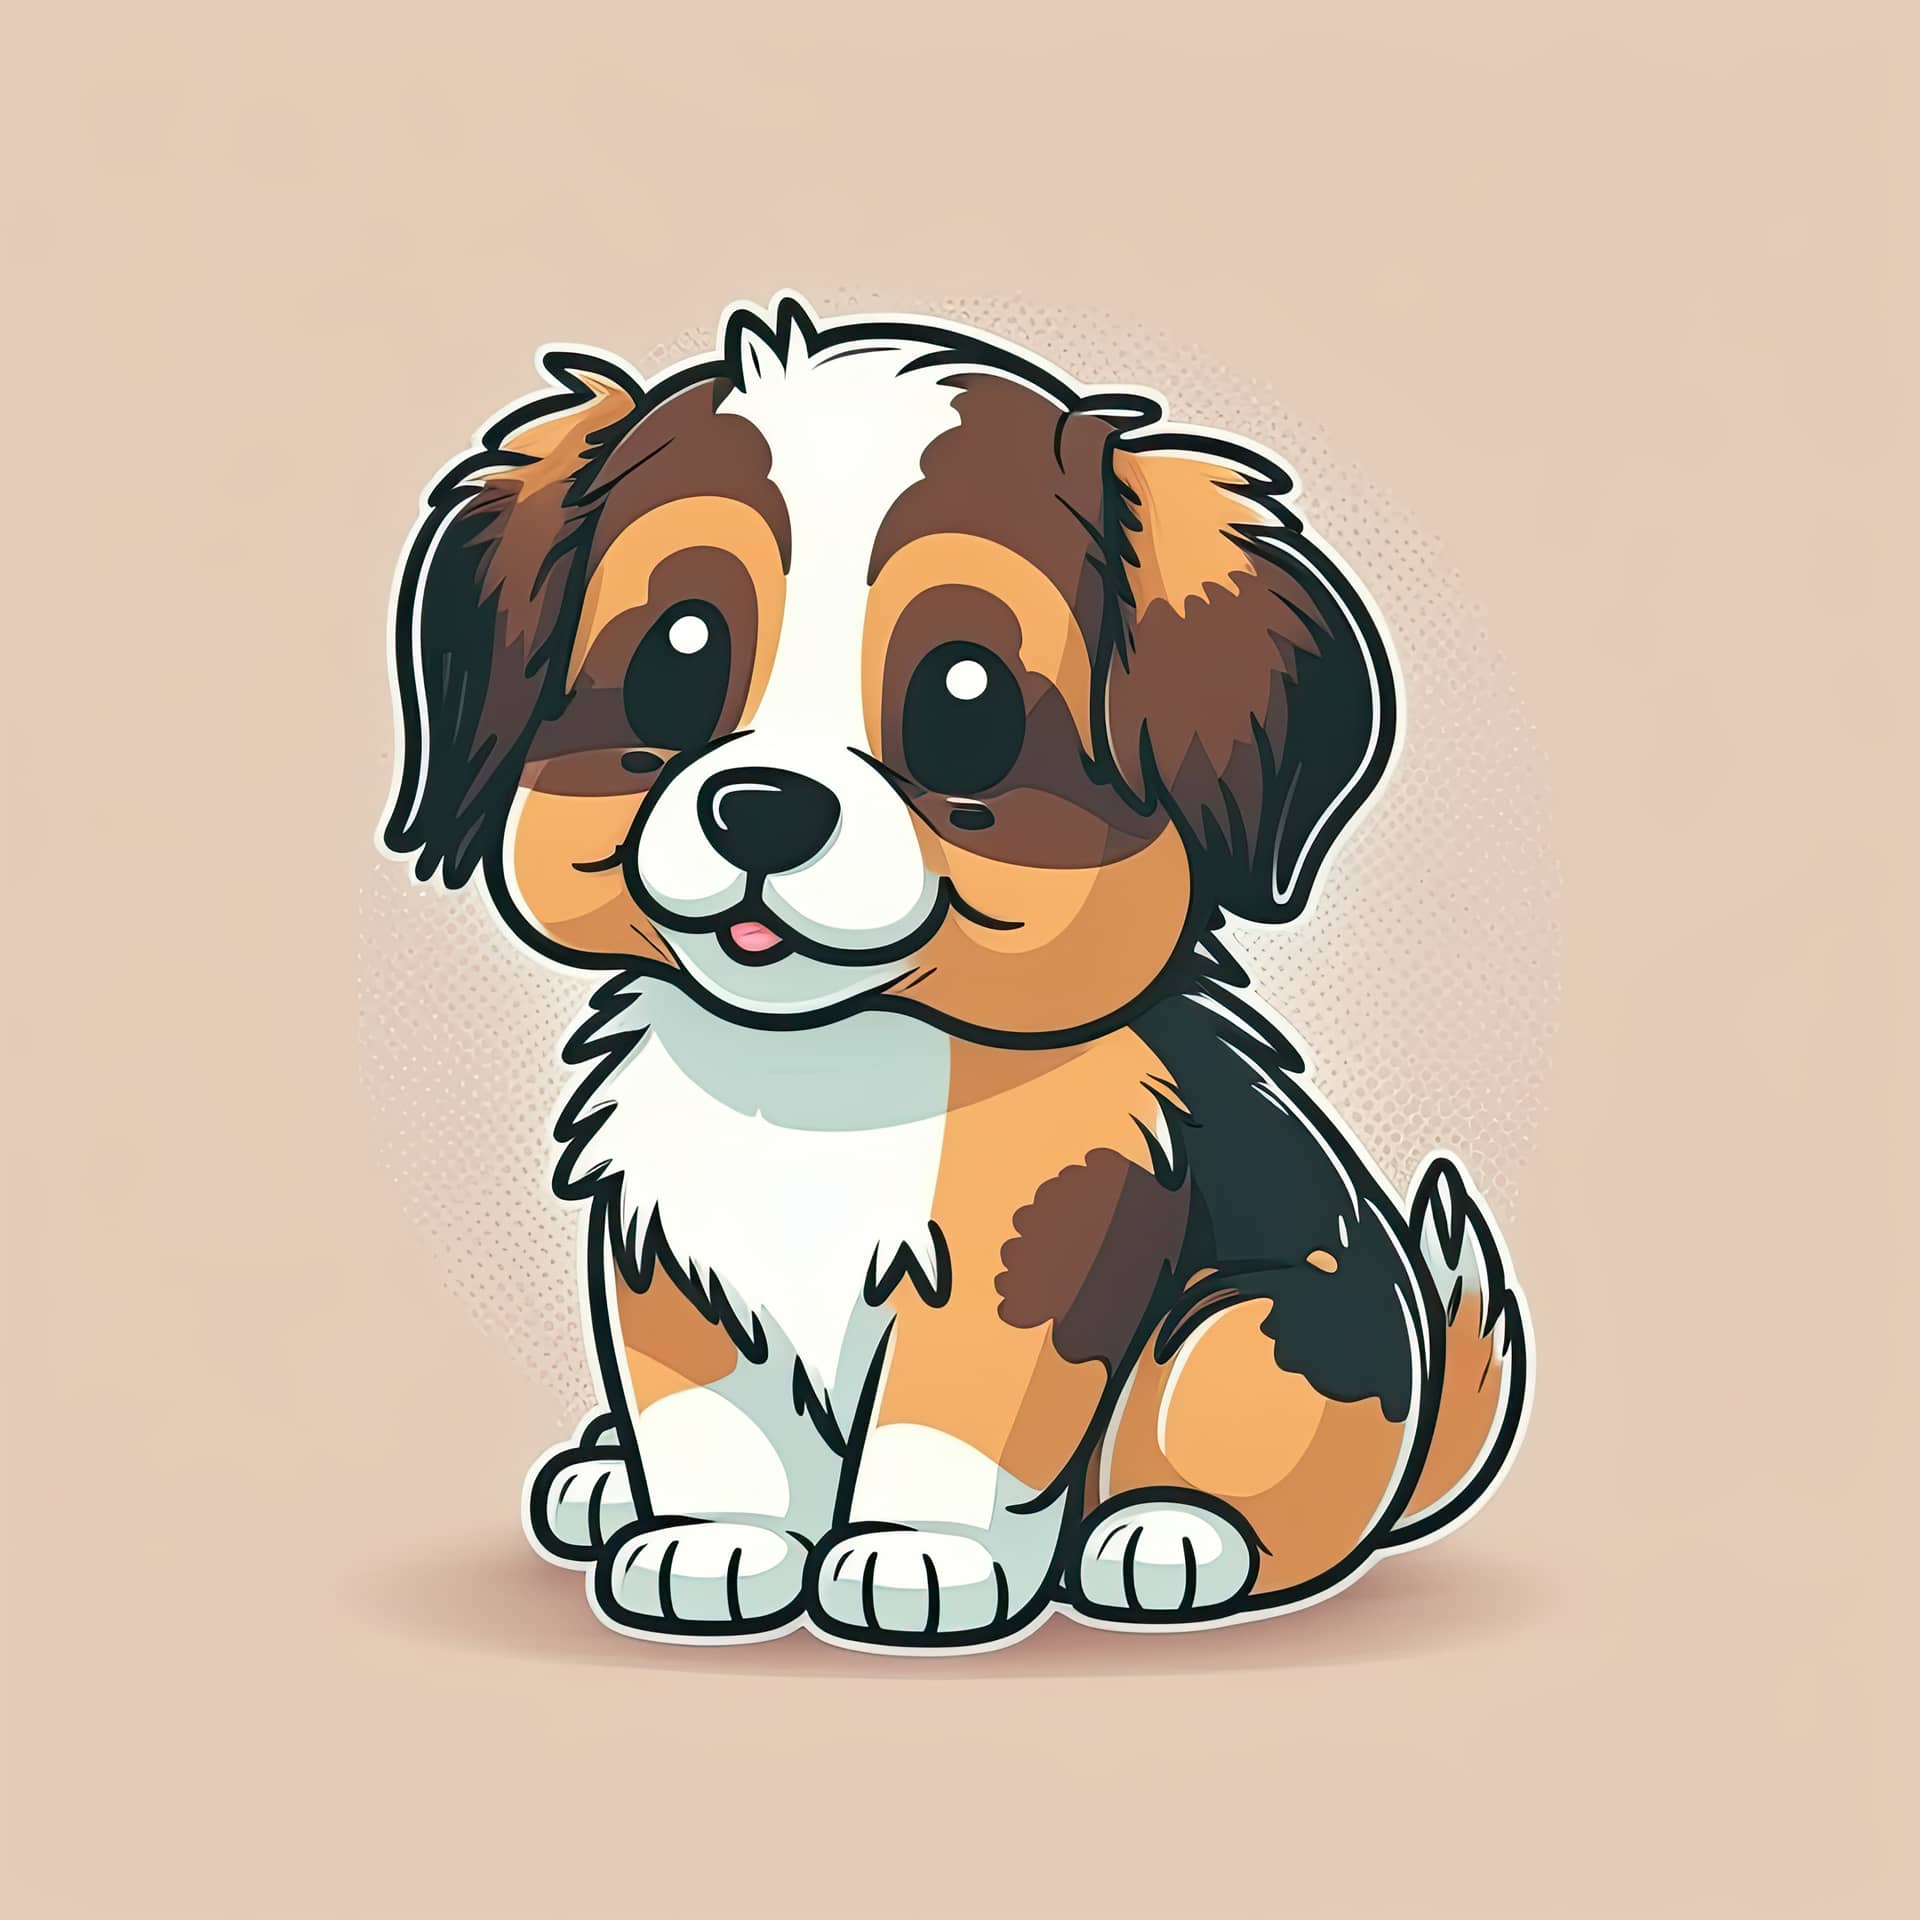 Cute animal cartoon characters anthropomorphic dog cartoon profile pictures